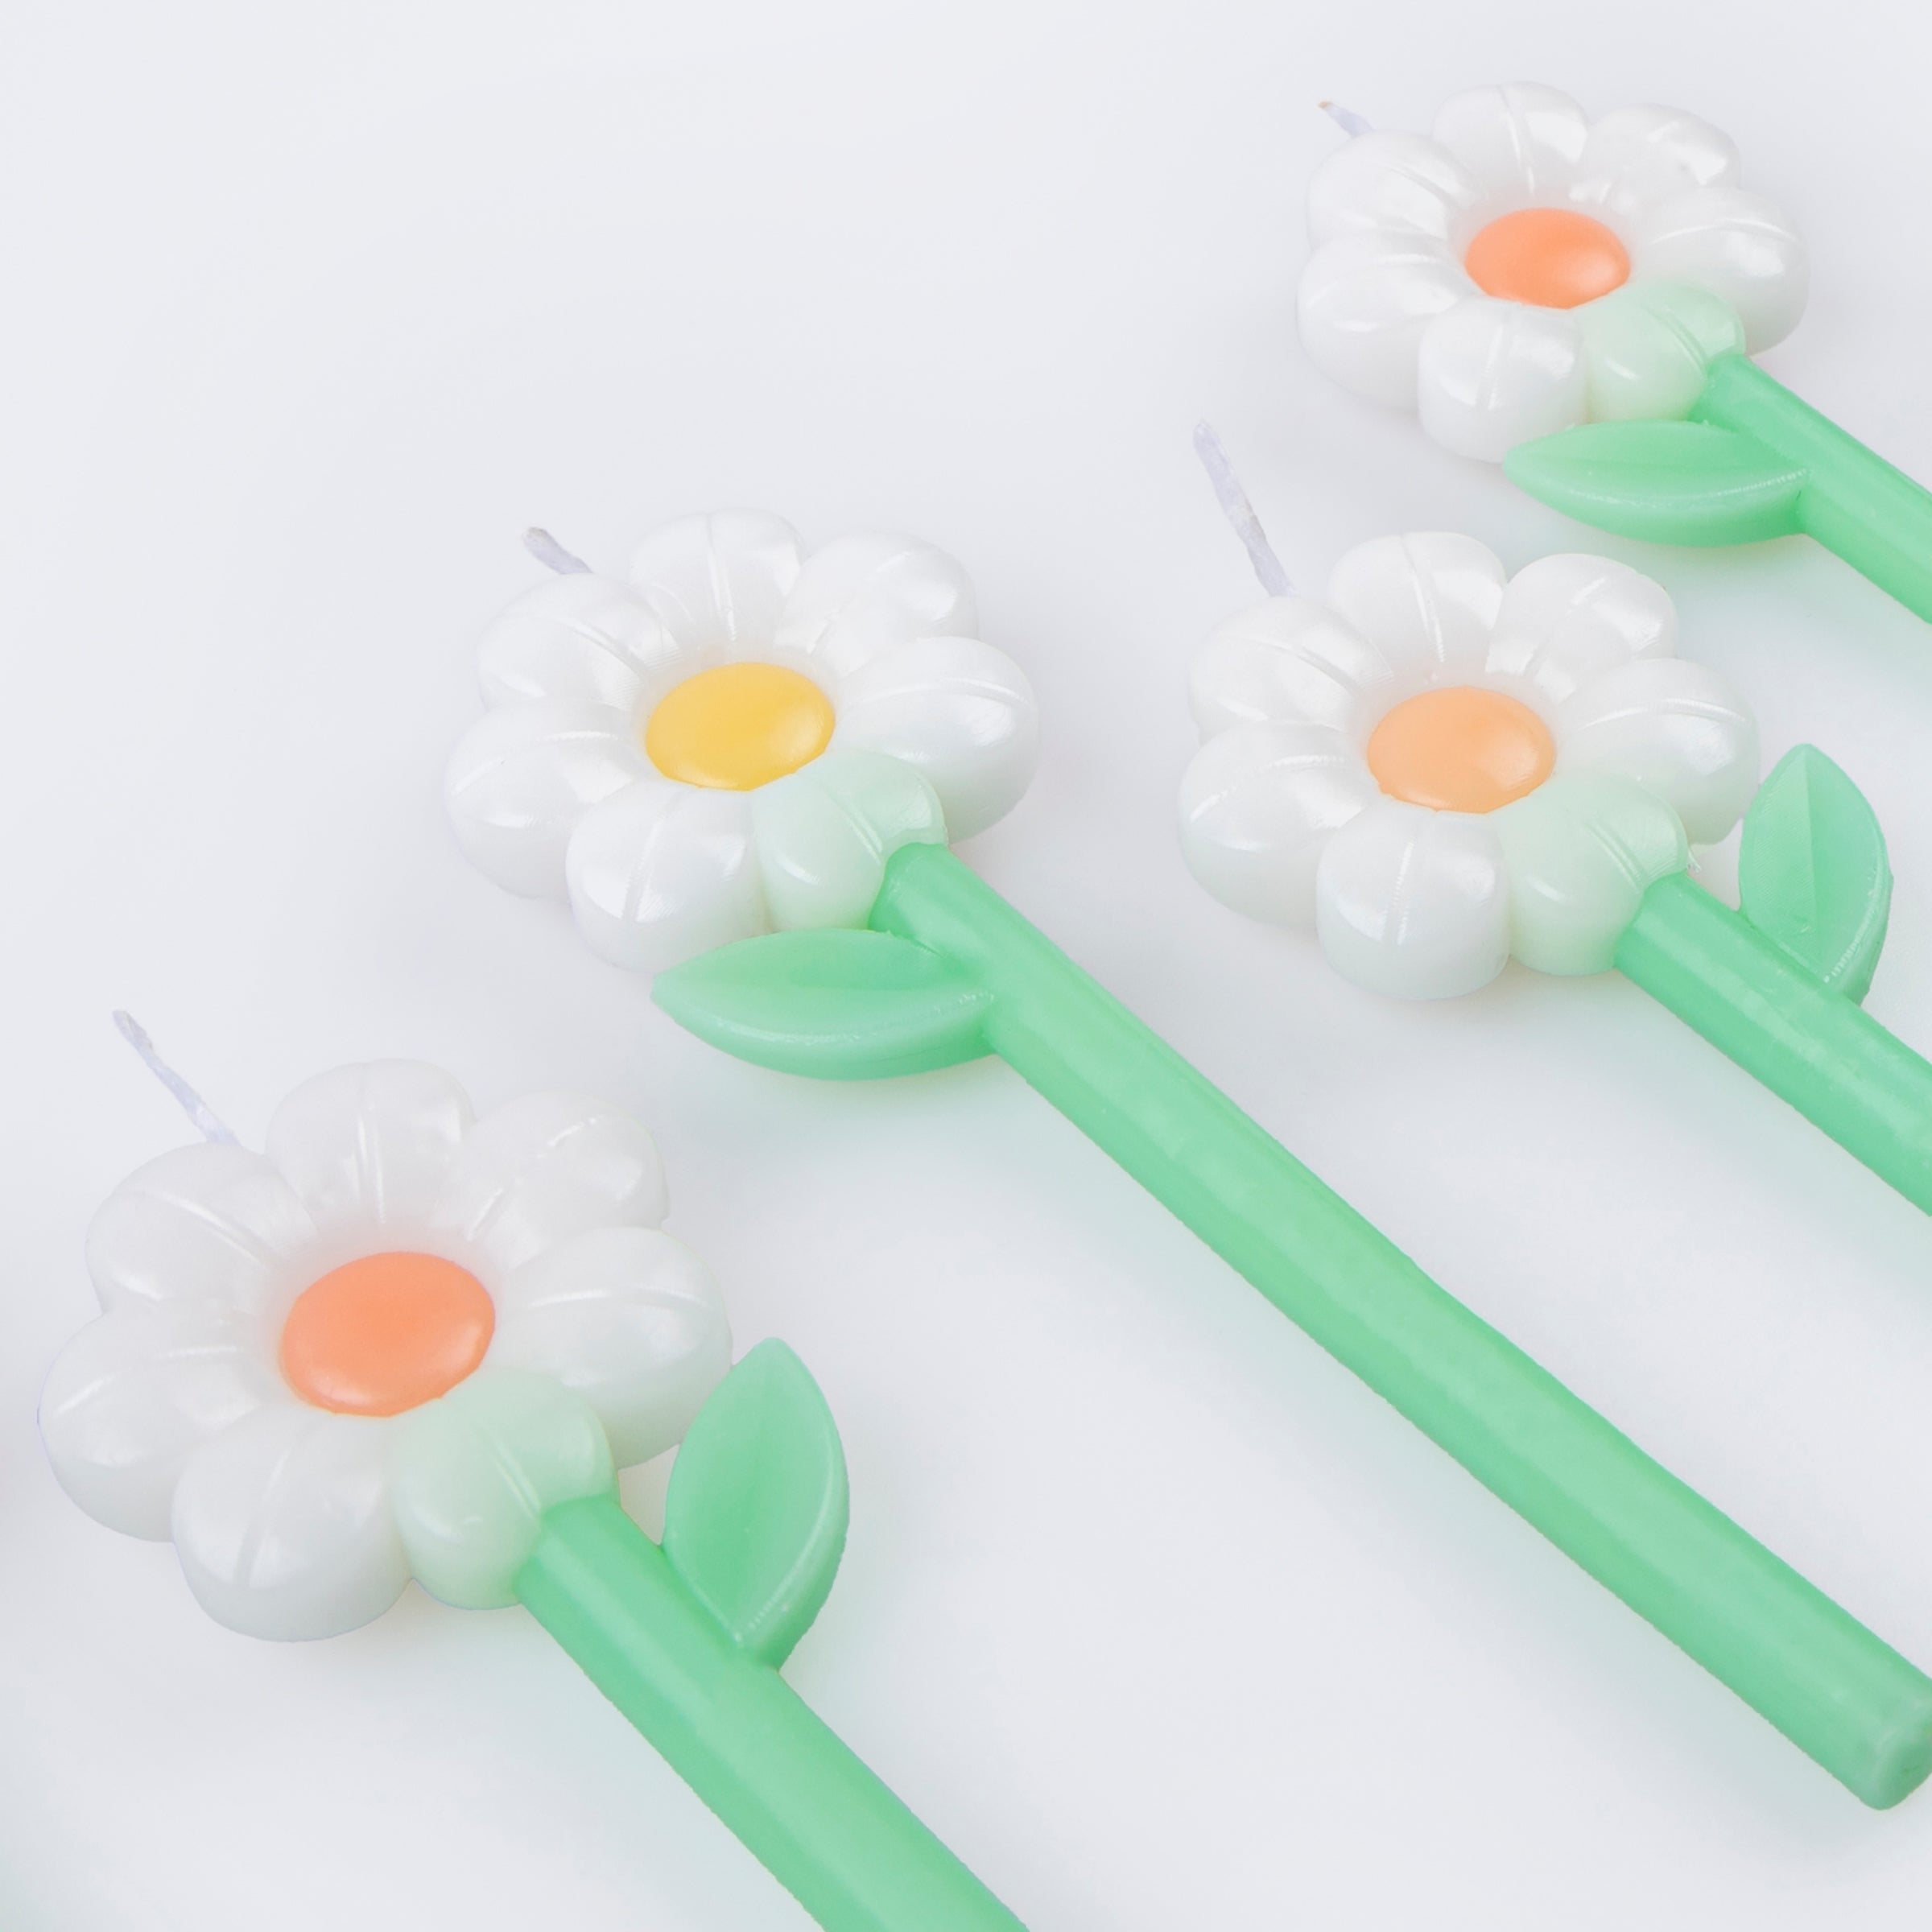 Our daisy candles are perfect as cupcake candles, or as birthday cake decorations.